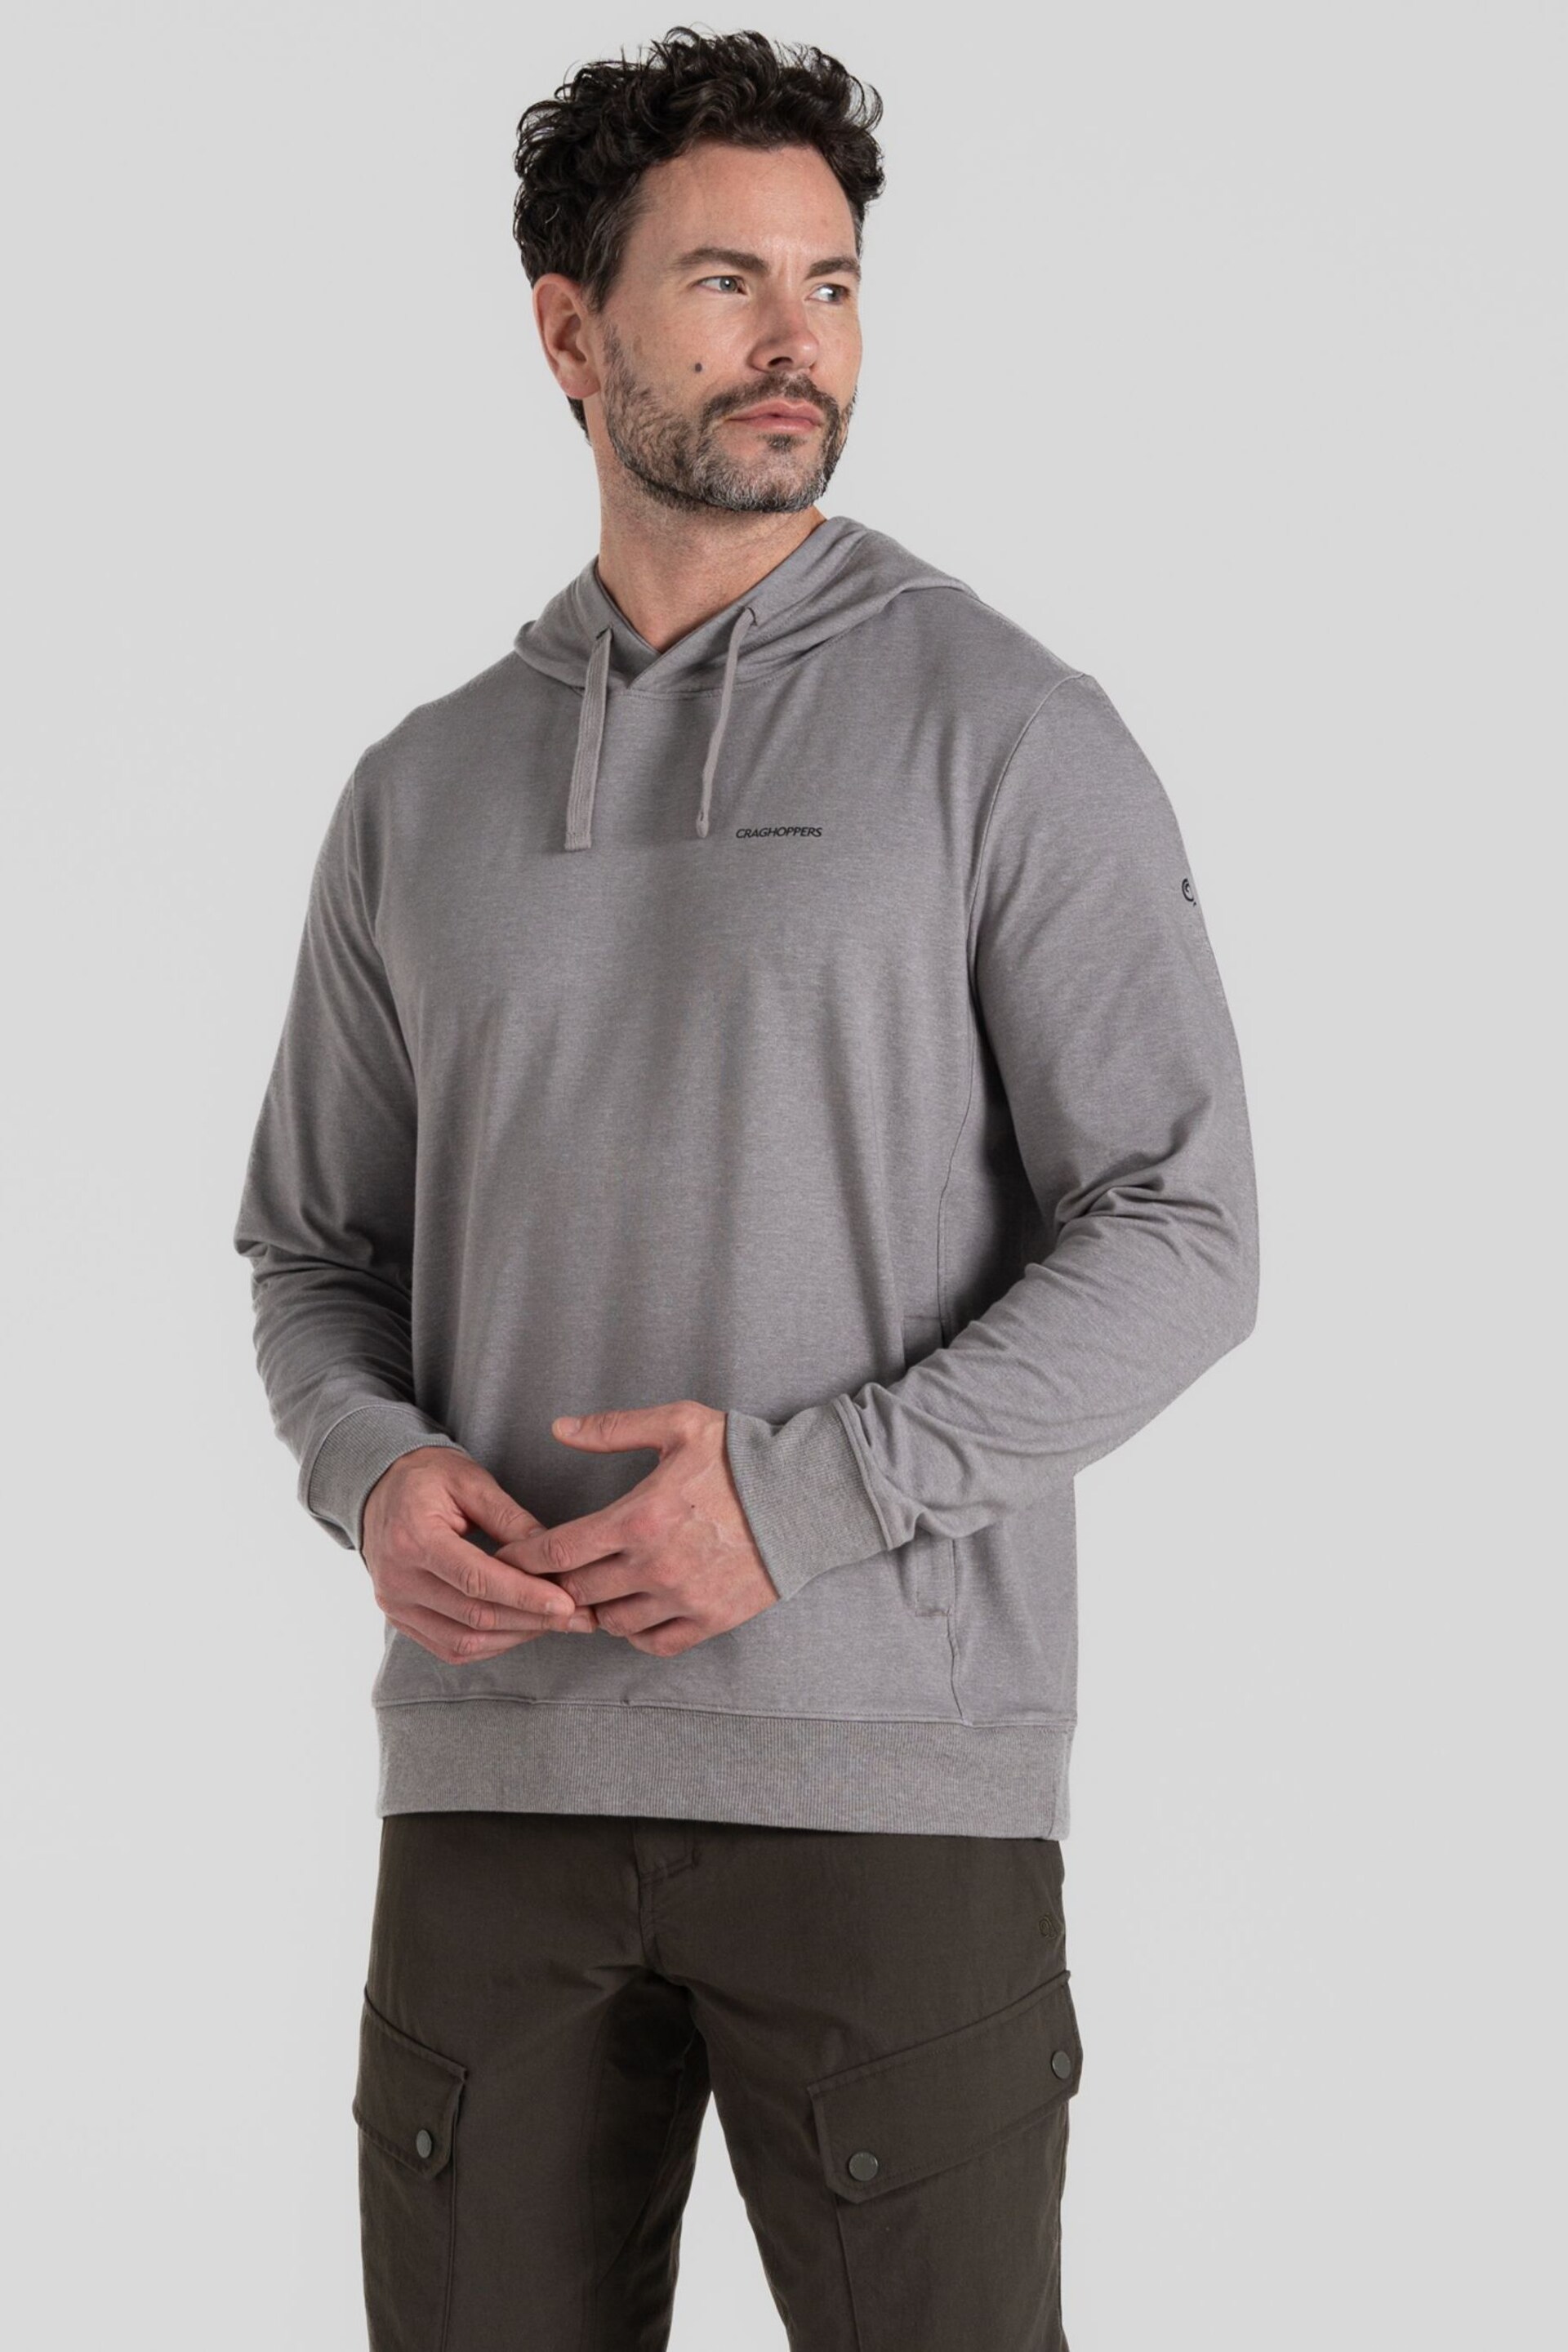 Craghoppers Grey NL Tagus Hooded Top - Image 1 of 7